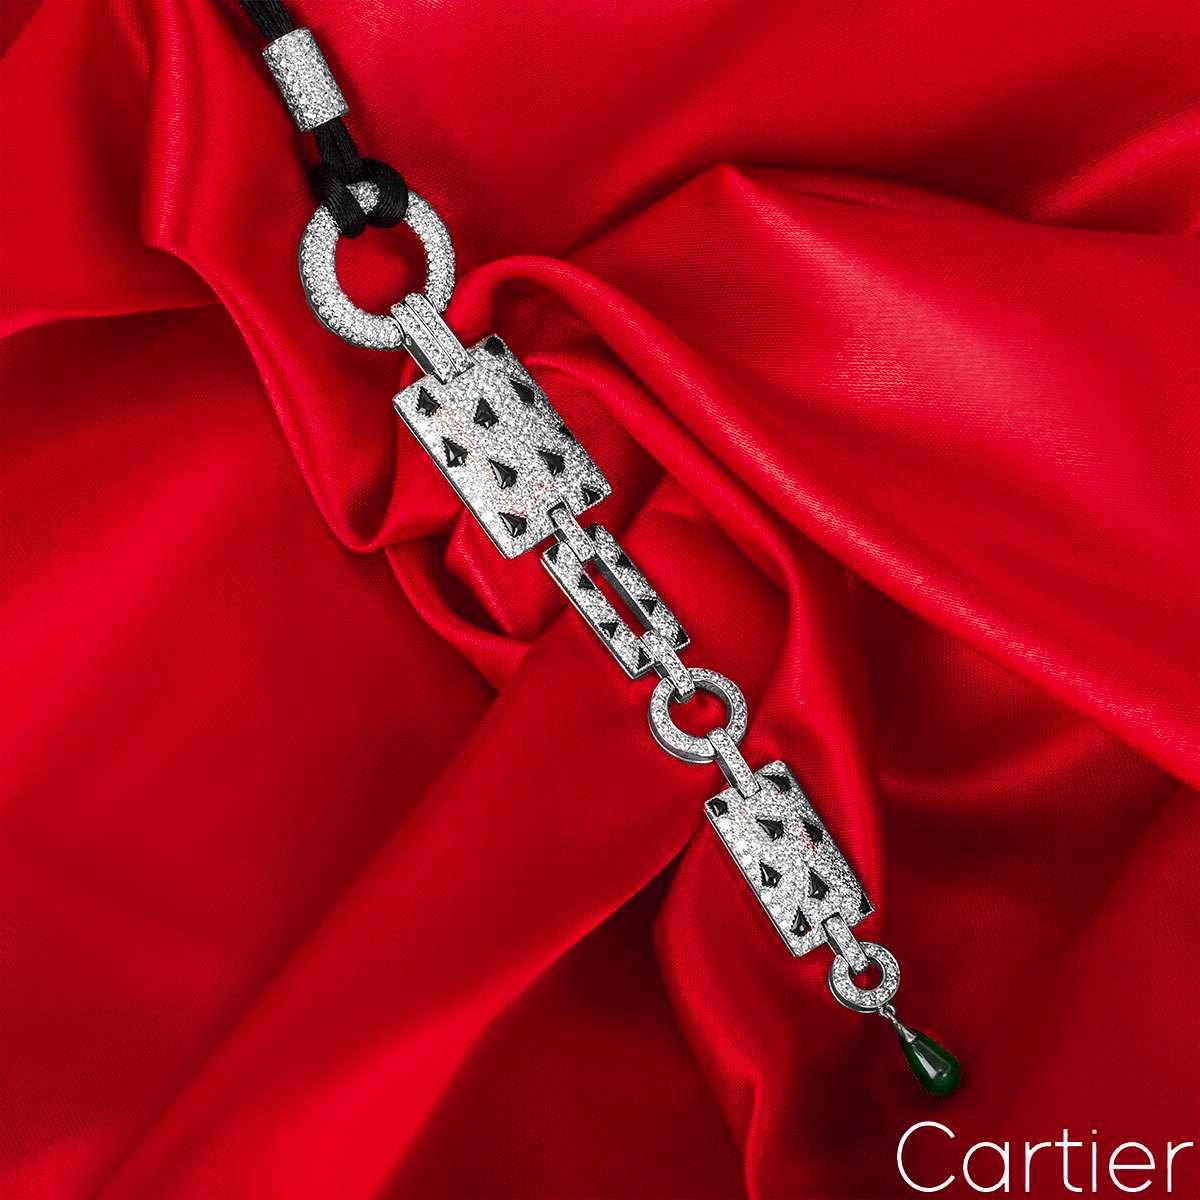 A remarkable 18k white gold Cartier necklace from the Panthere collection. The necklace is formed of circular and rectangular motifs featuring 26 scattered black onyx markings and pave set diamonds. The necklace has a total of 416 round brilliant